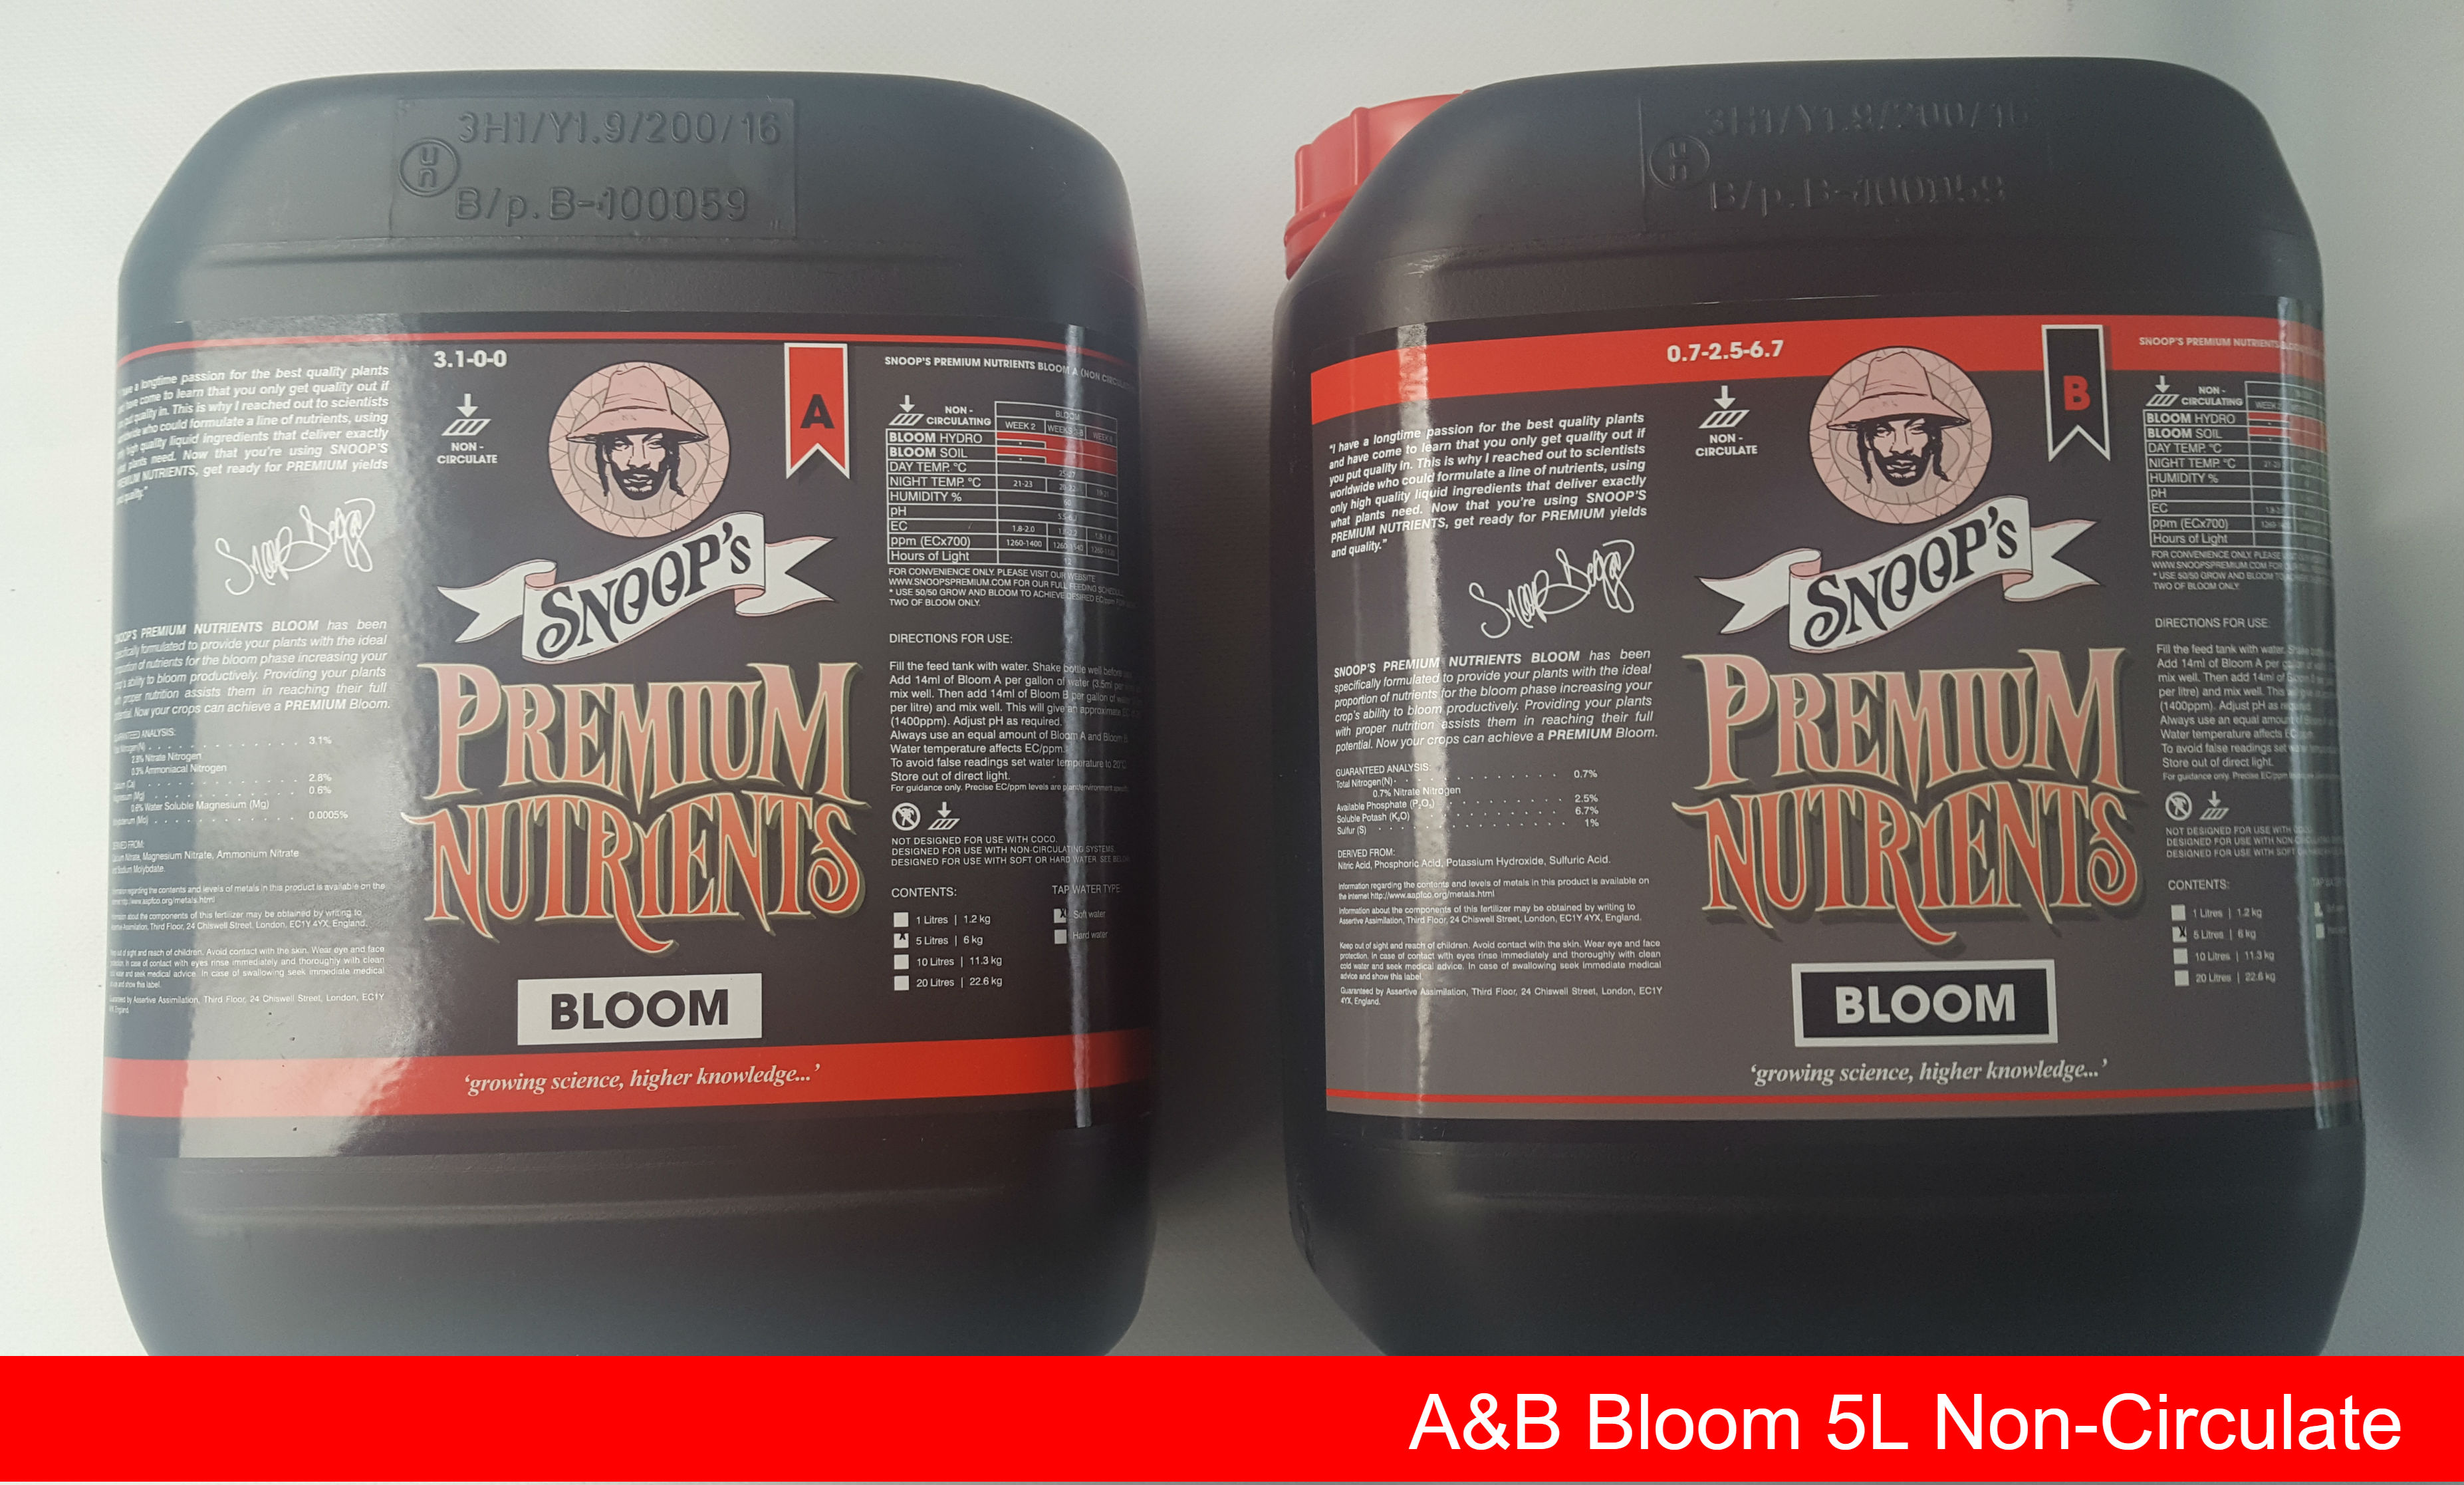 Snoop's A&B Bloom 5L Non-Circulate for Soil